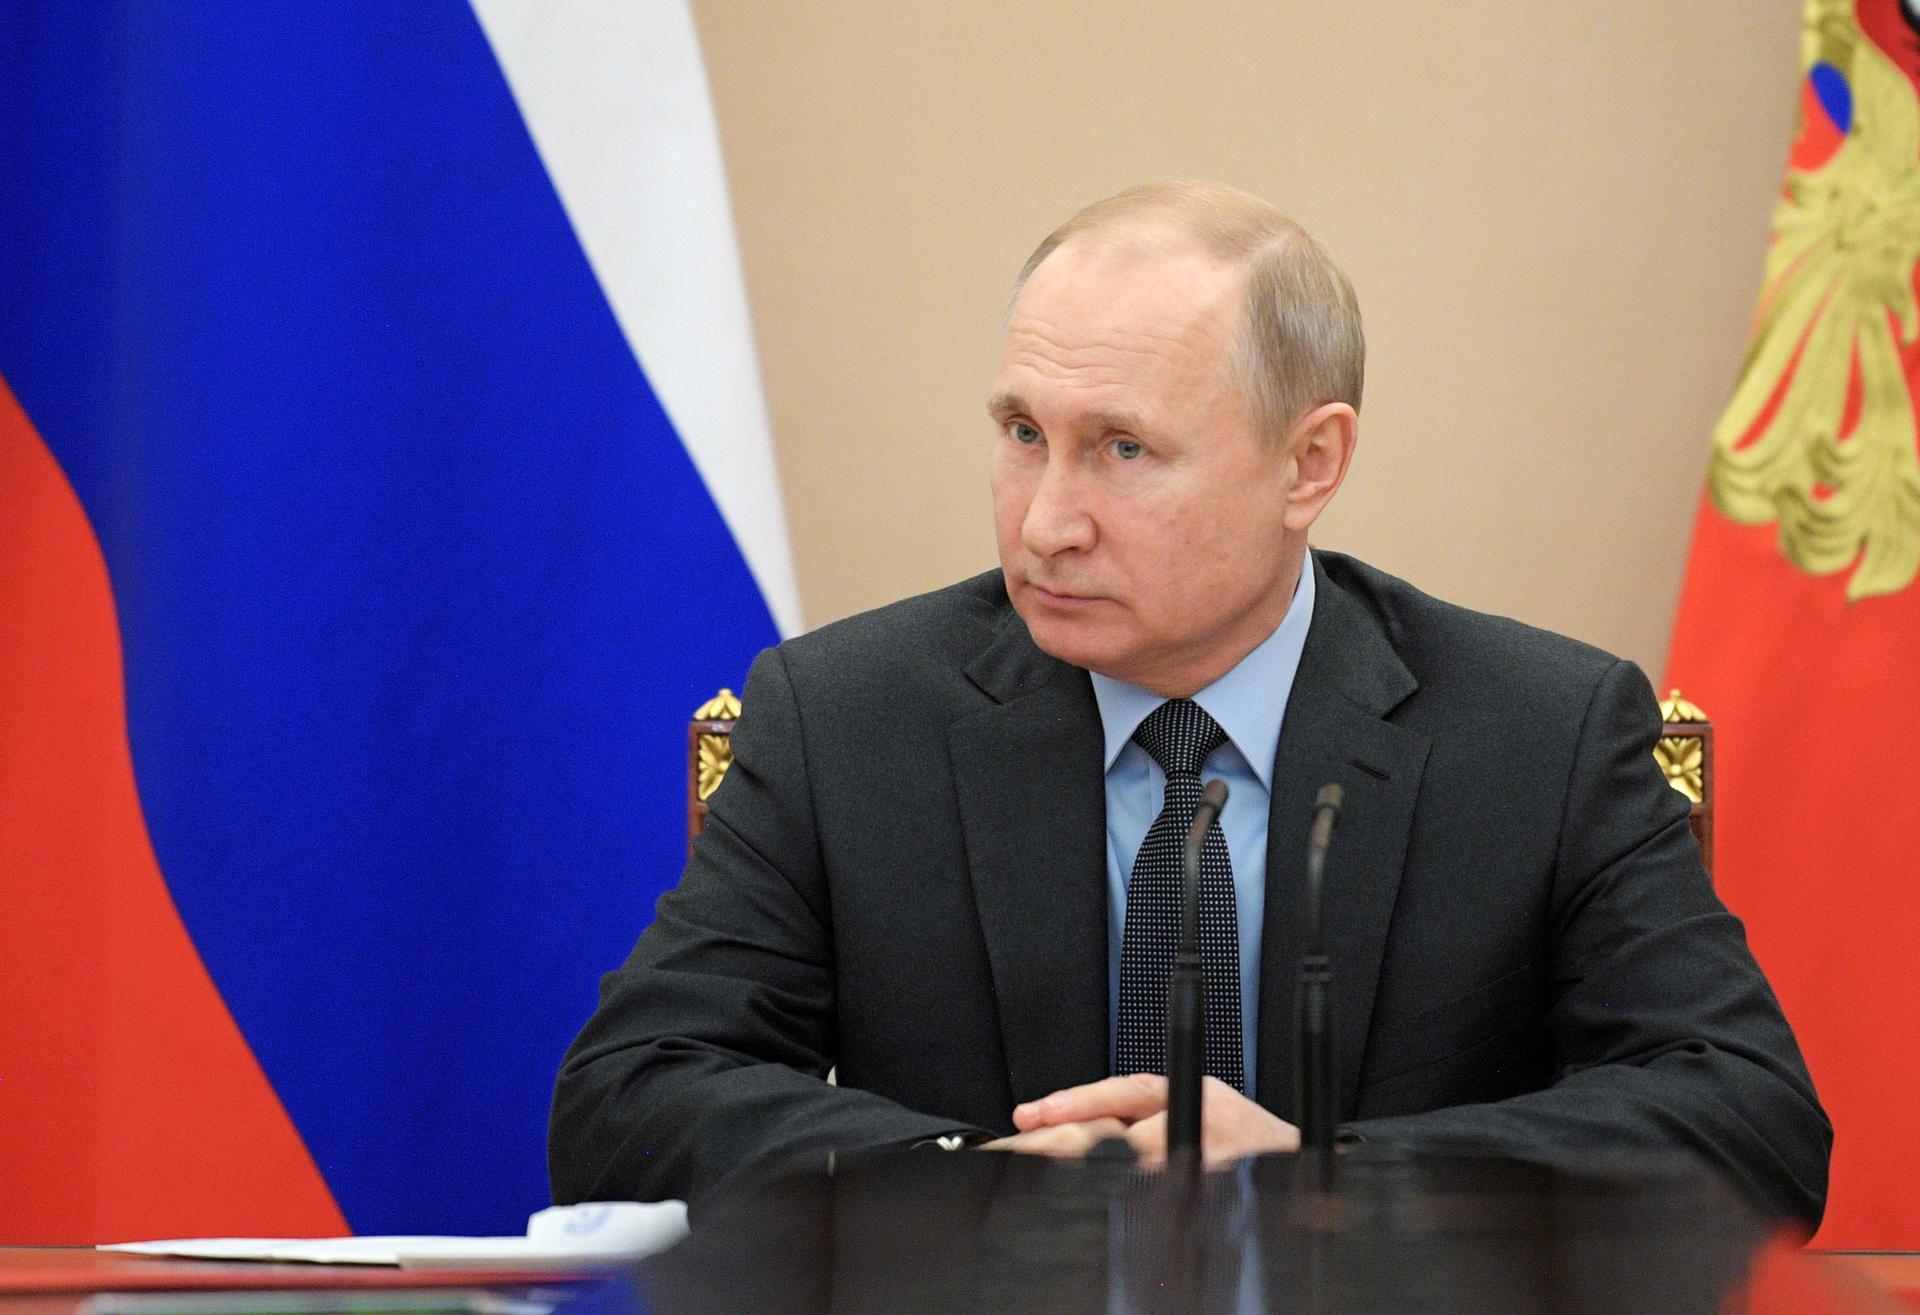 Vladimir Putin sits at a desk with the Russian flag behind him. 